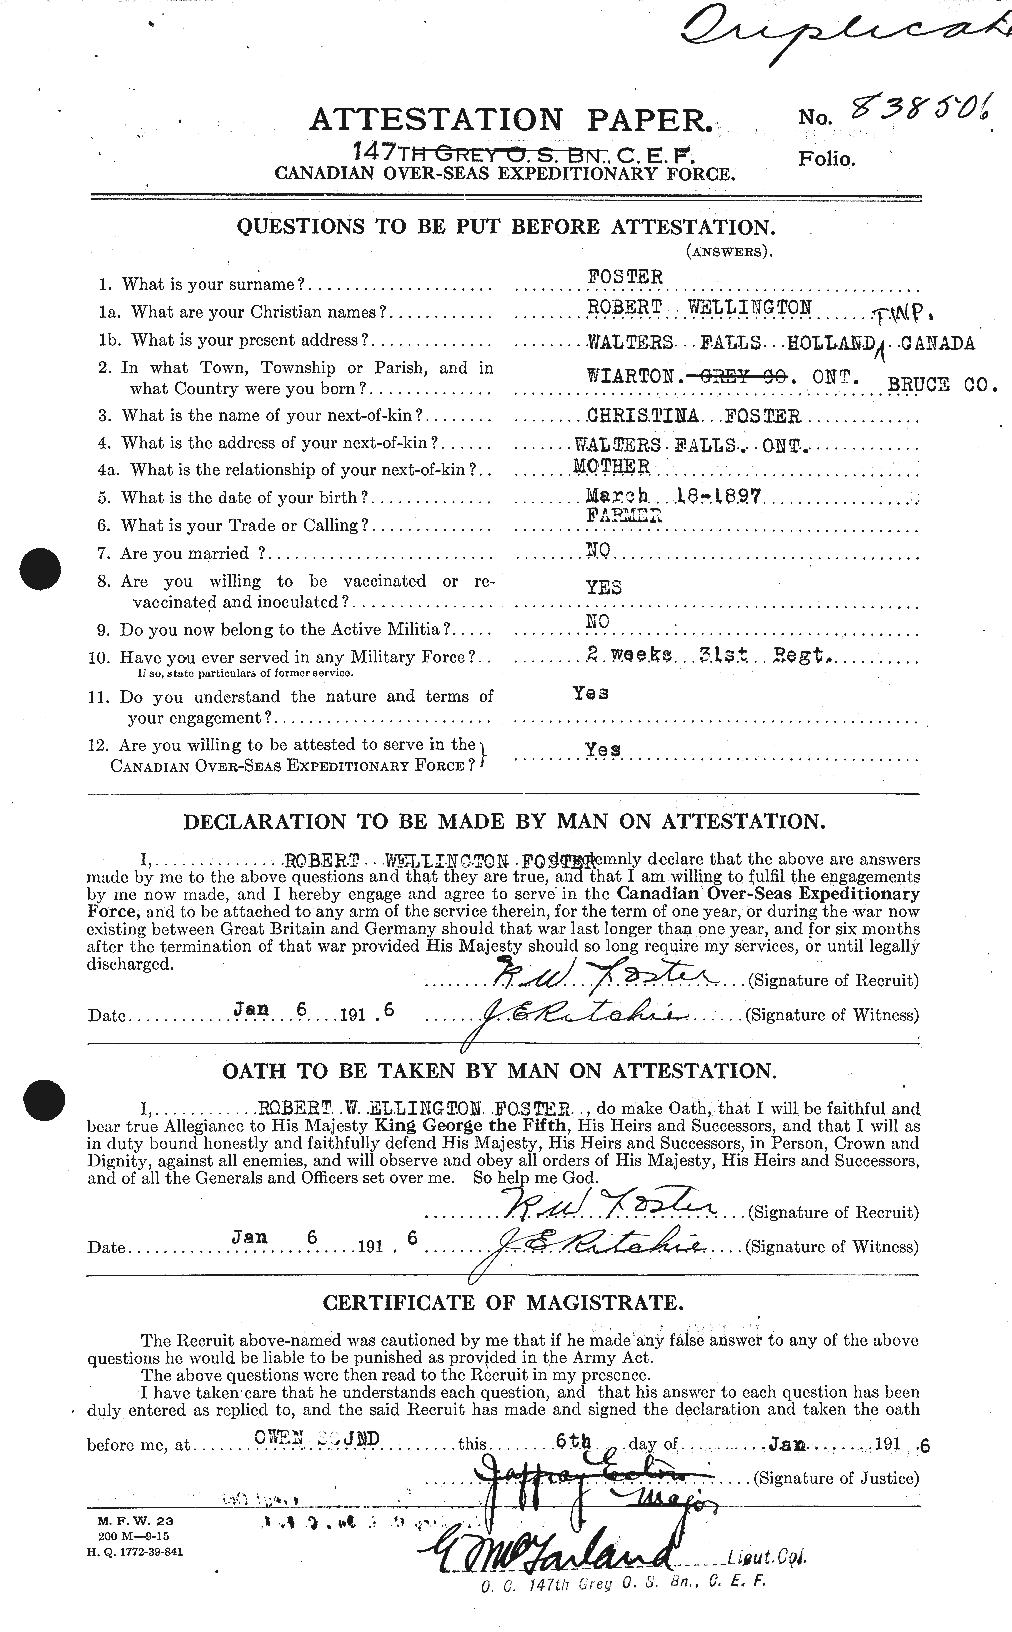 Personnel Records of the First World War - CEF 335189a